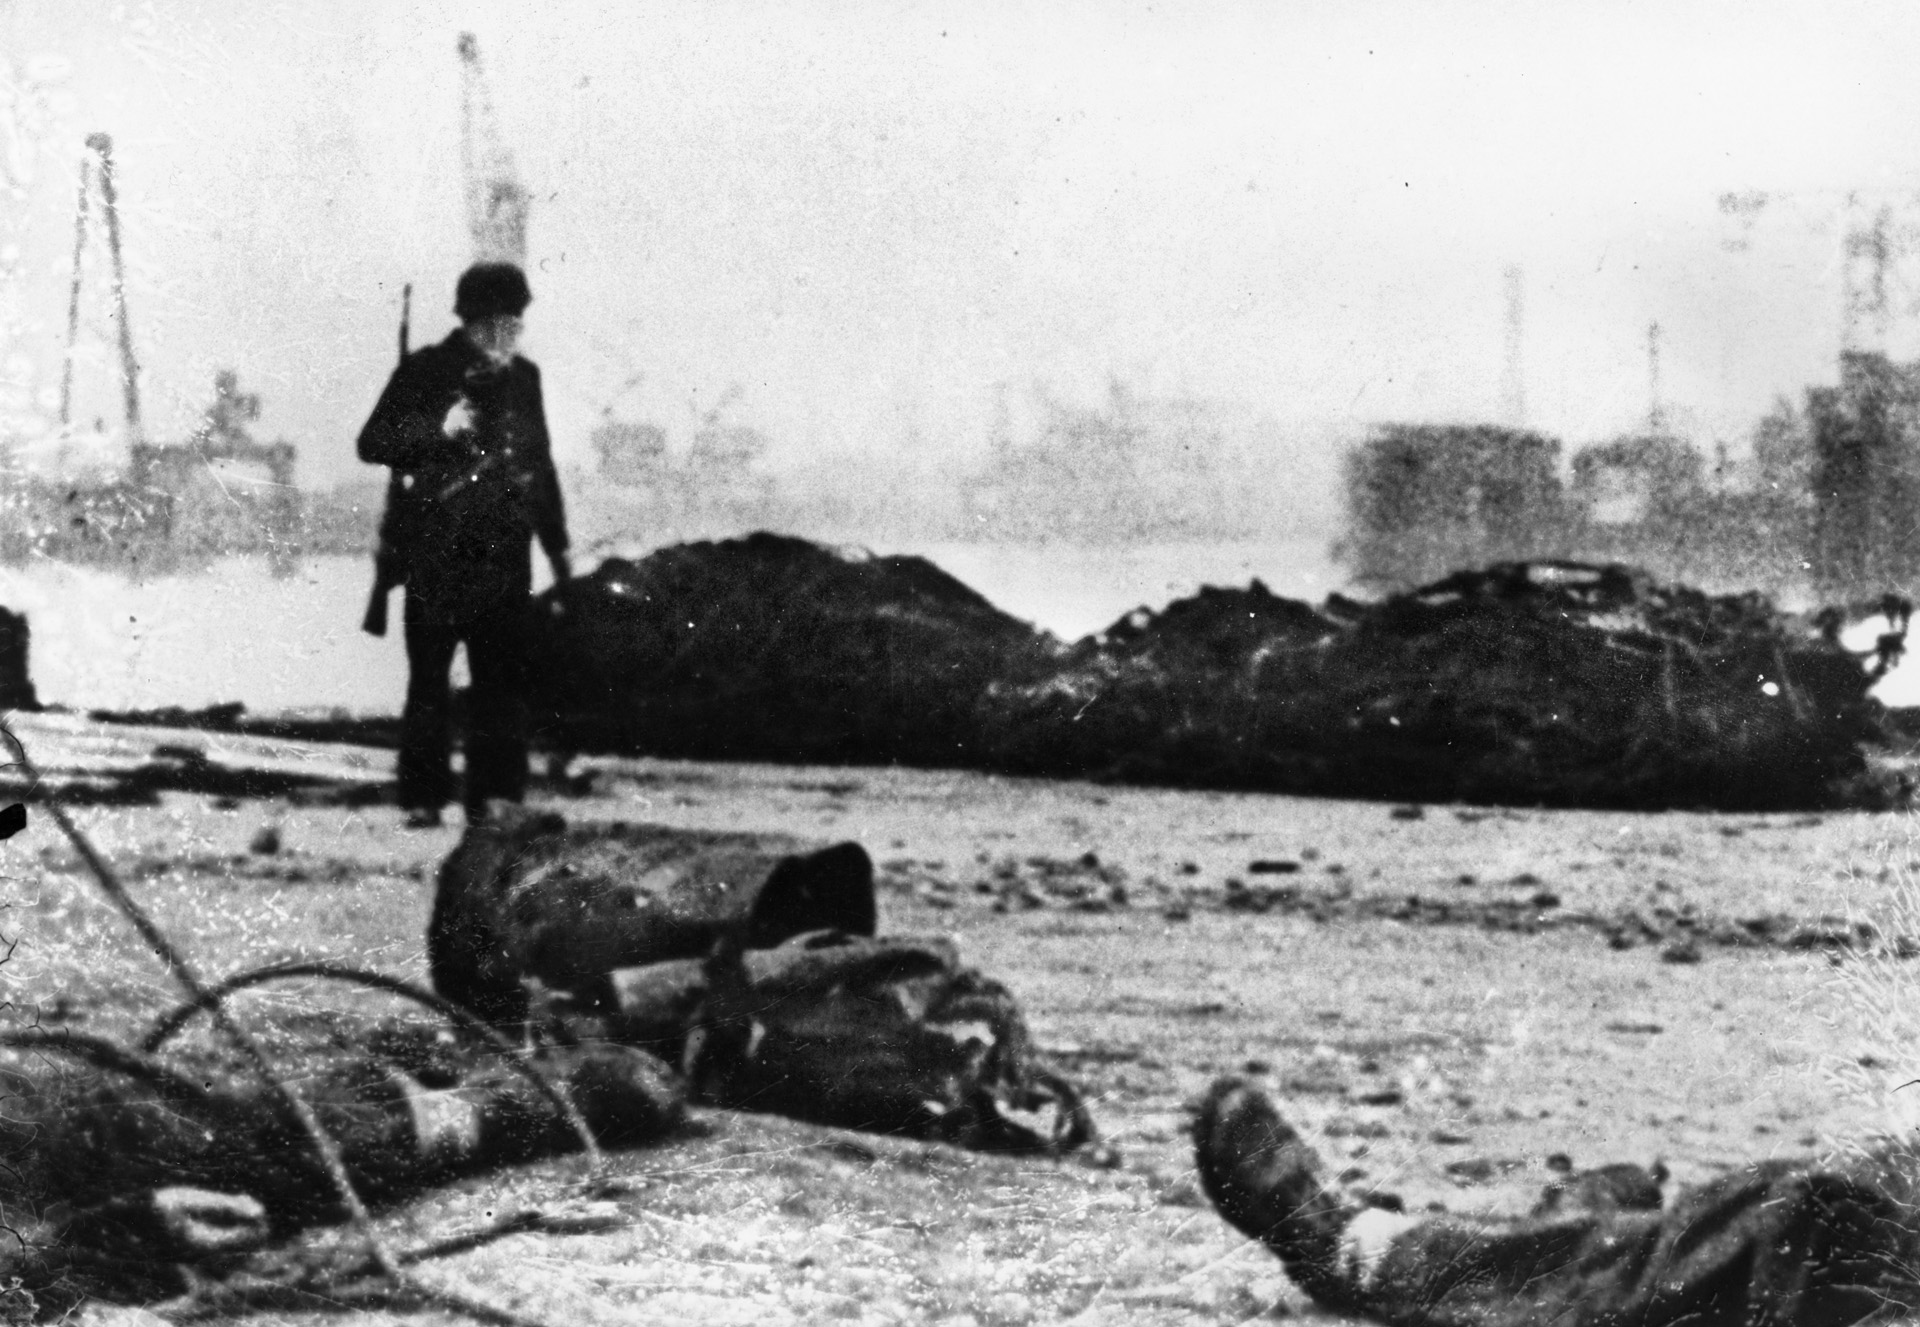 A German soldier inspects debris and British corpses along one of the docks at St. Nazaire.